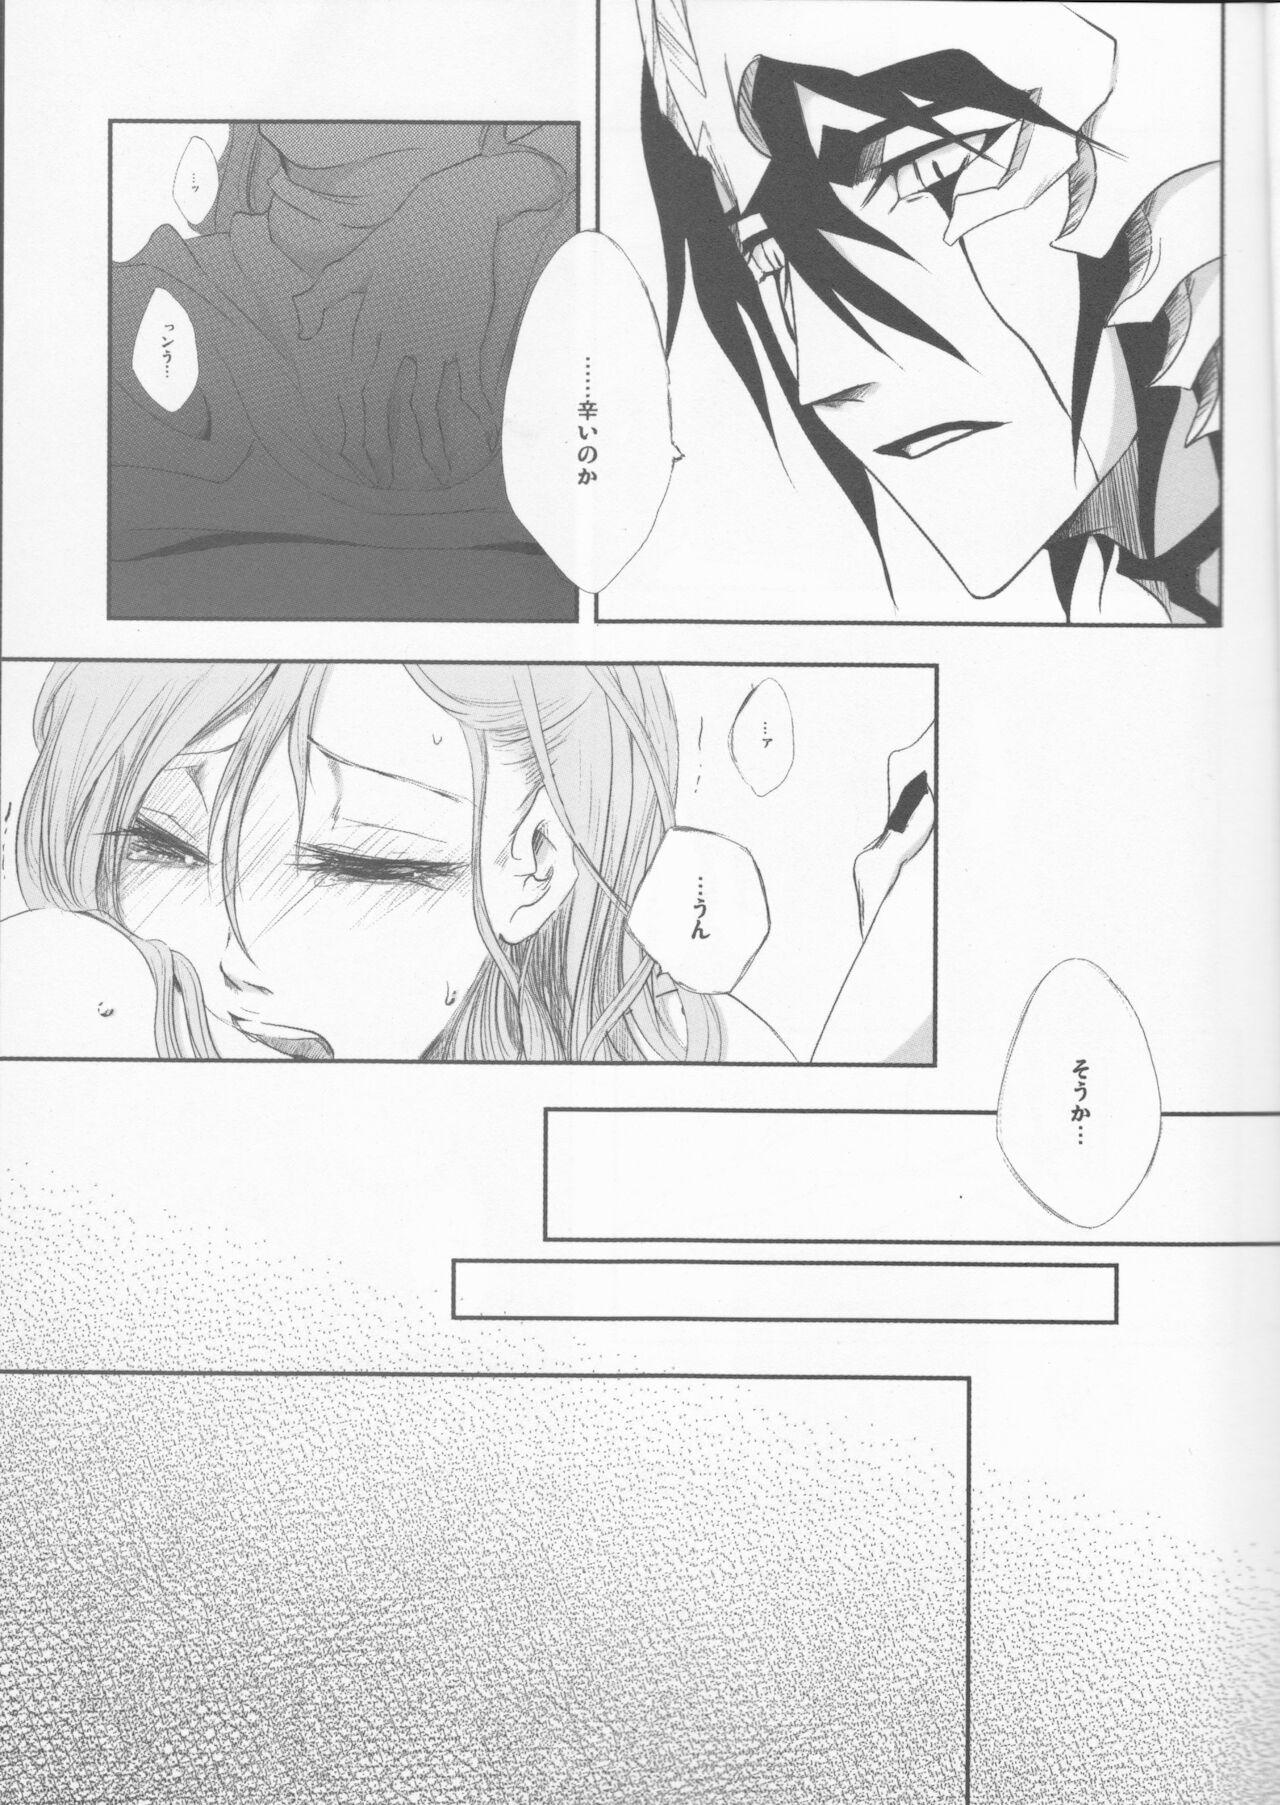 Moaning )]A GREEN COFFIN 「Buenas Noches」 - Bleach Livecams - Page 9